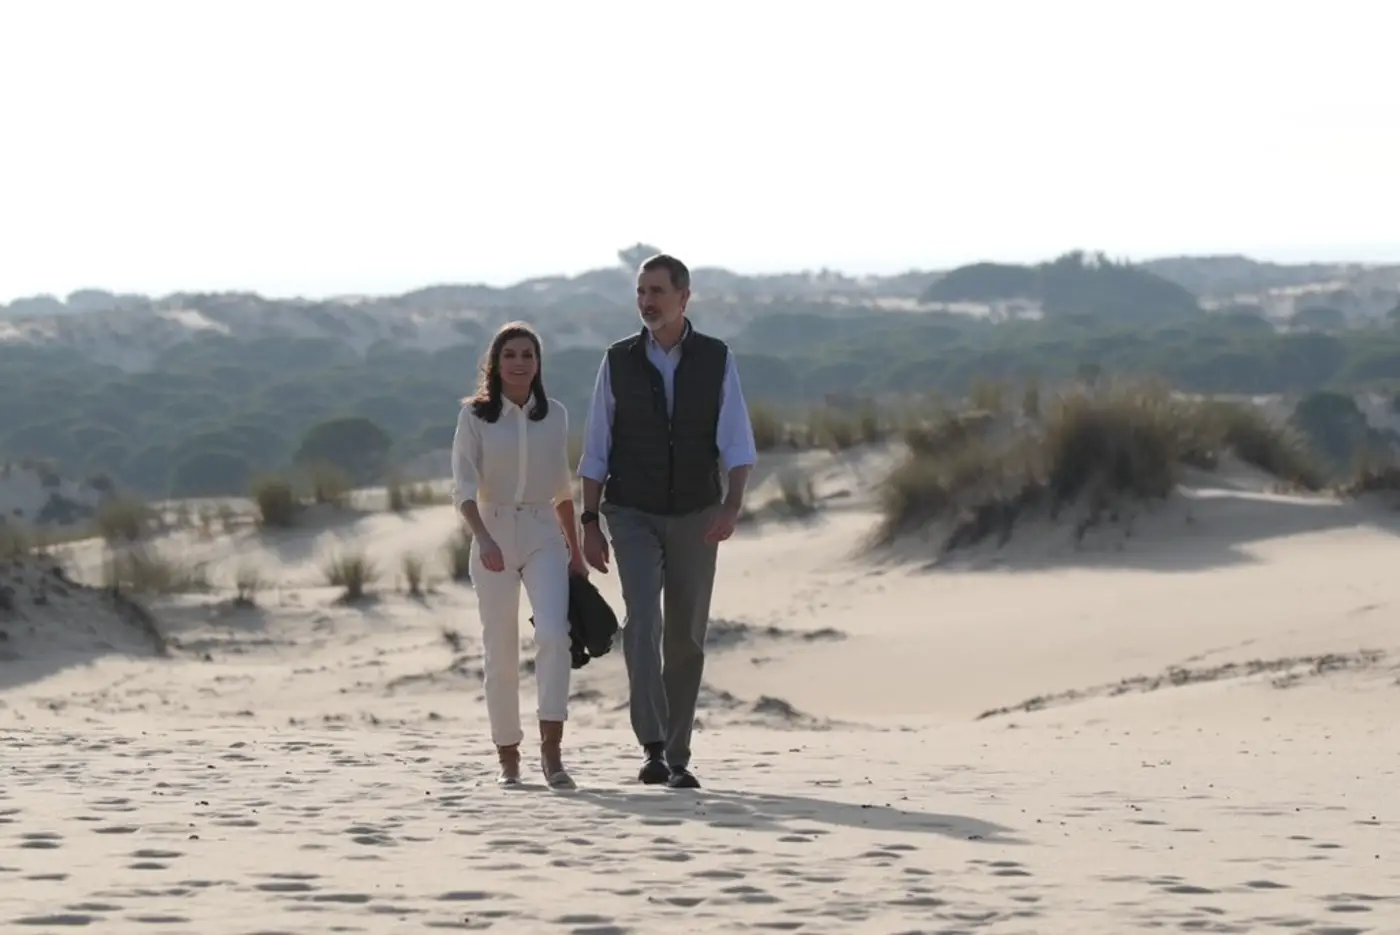 Felipe and Letizia enjoyed a day at the Doñana National Park, mosaic of ecosystems that house unique biodiversity in Europe.